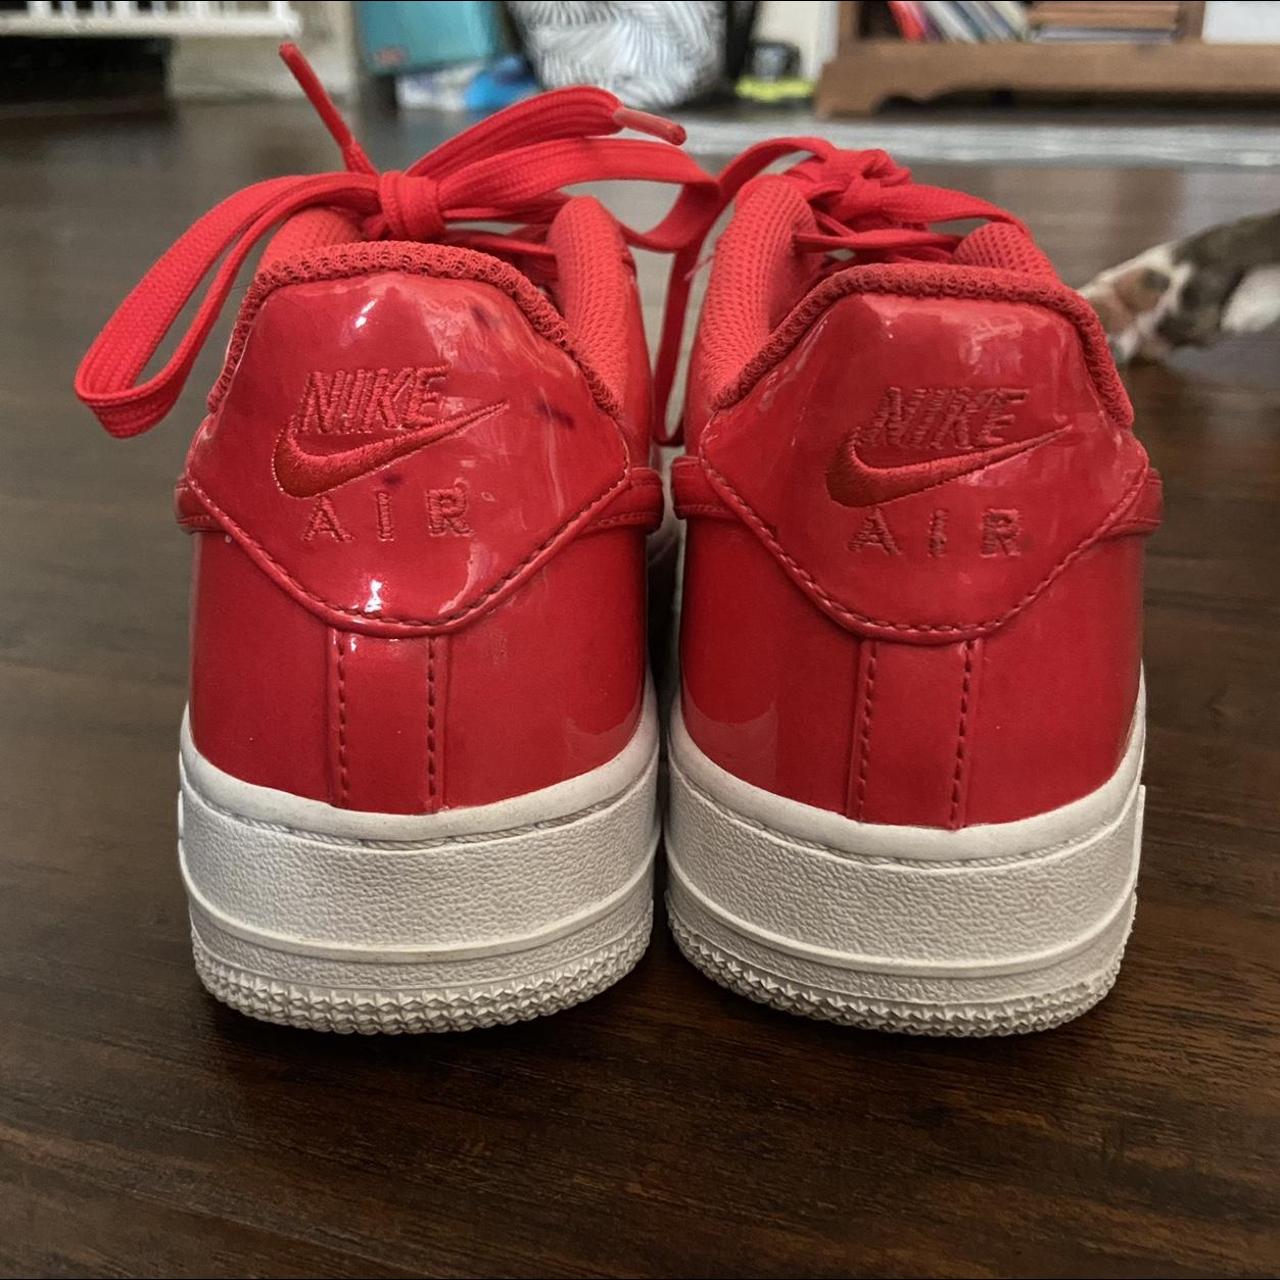 Glossy Red Nike Air Forces, Size US Women’s 7.5,... - Depop